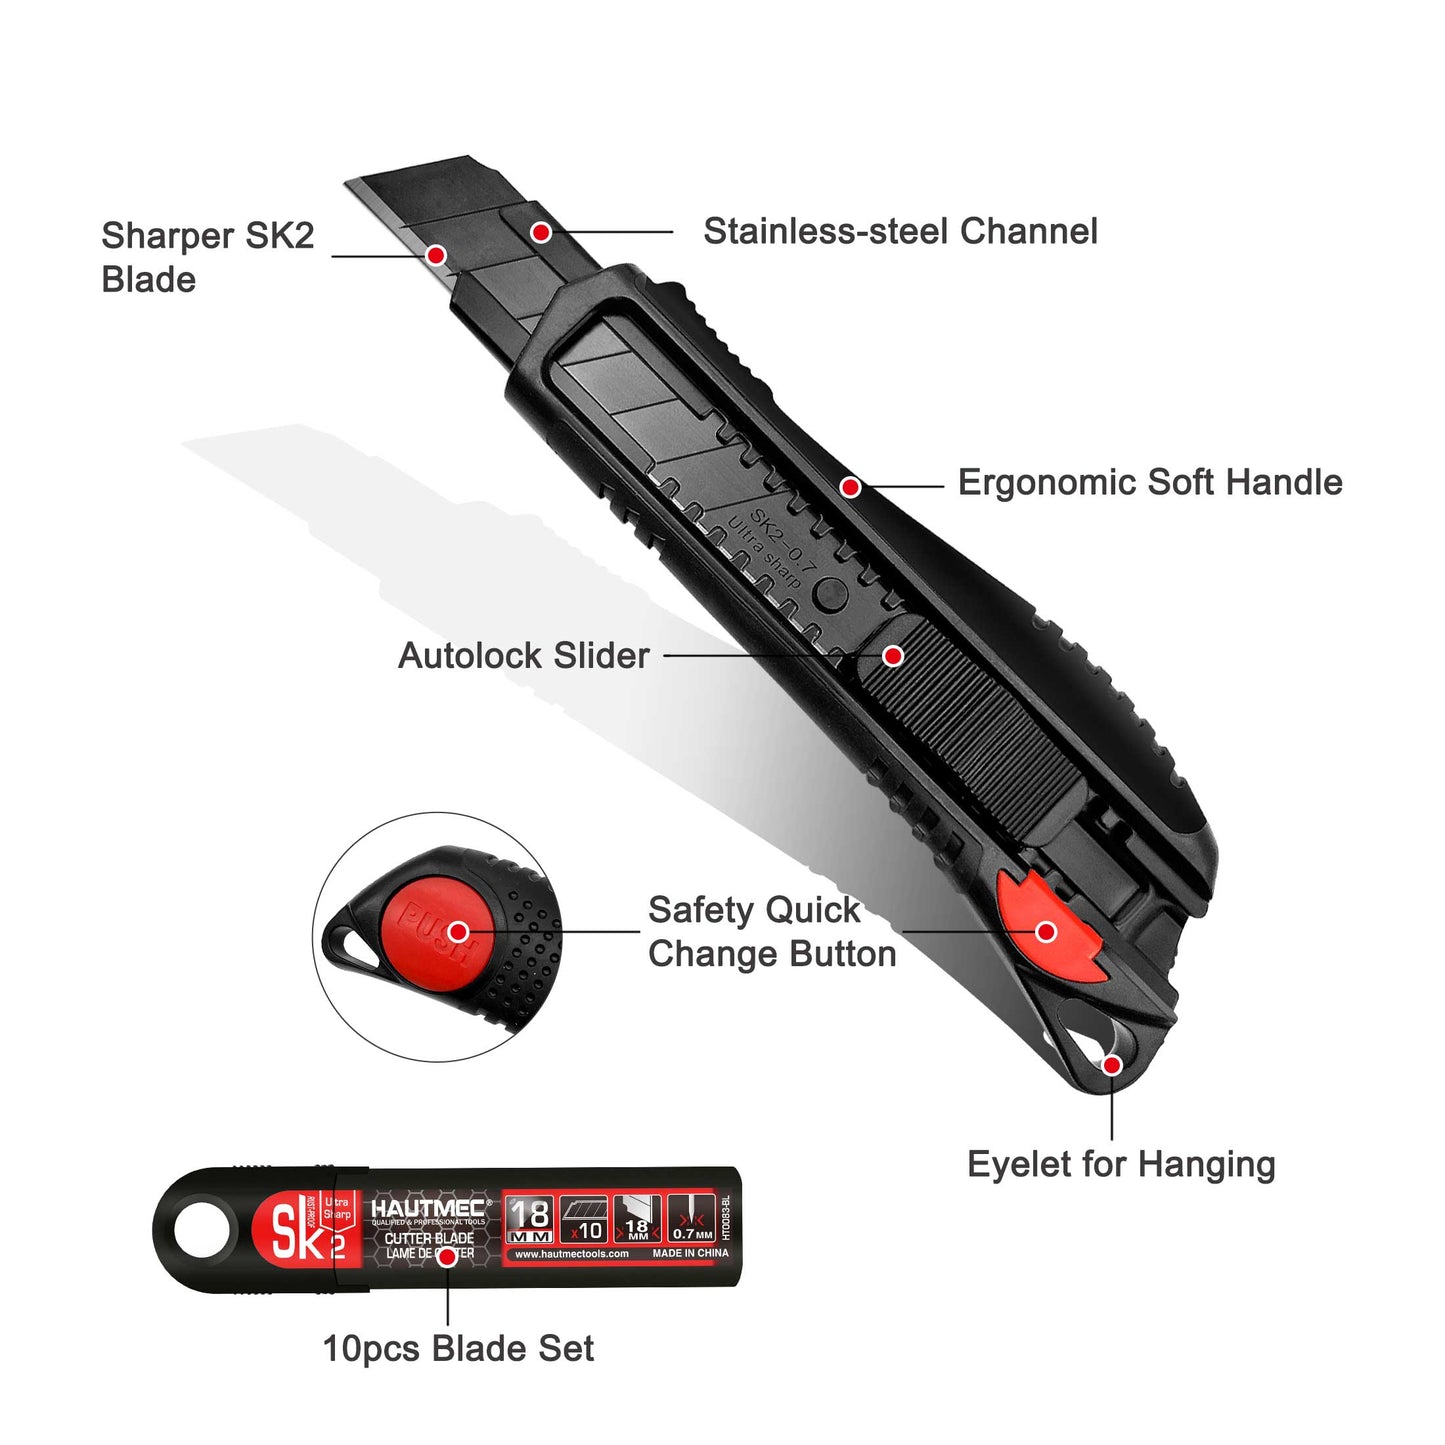 HAUTMEC 18mm Utility Knife Box Cutter with Quick Change Button and 10pcs Blade Set, Retractable Snap off Black SK2 Ultra Sharp Blade, Anti-Slip Ergonomic Rubber Handle HT0094-KN